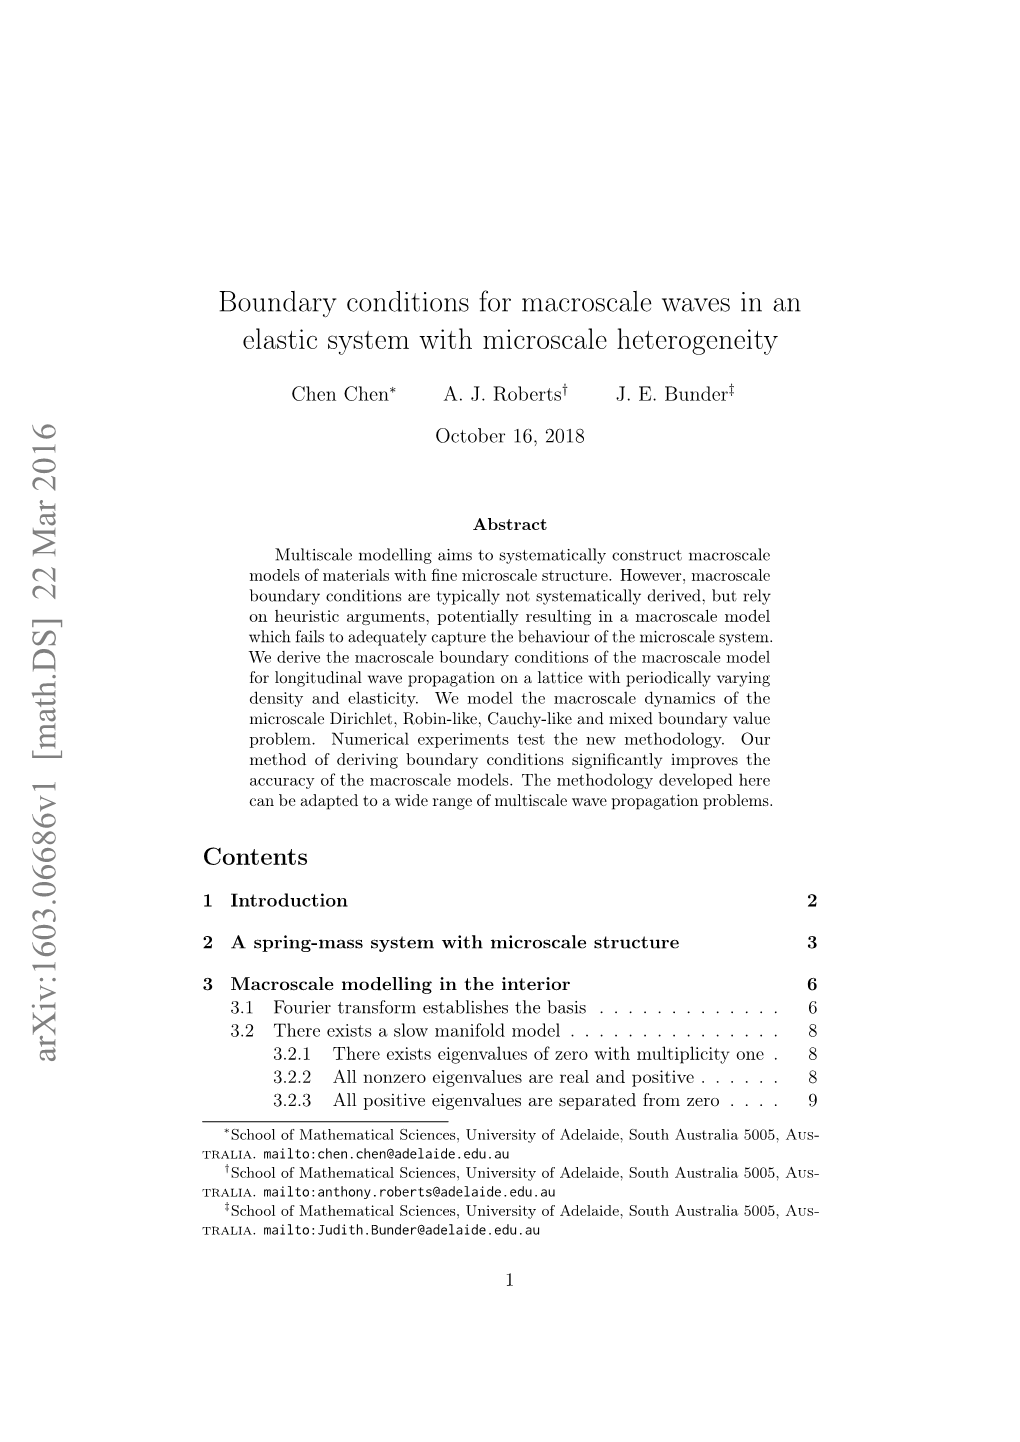 Boundary Conditions for Macroscale Waves in an Elastic System with Microscale Heterogeneity